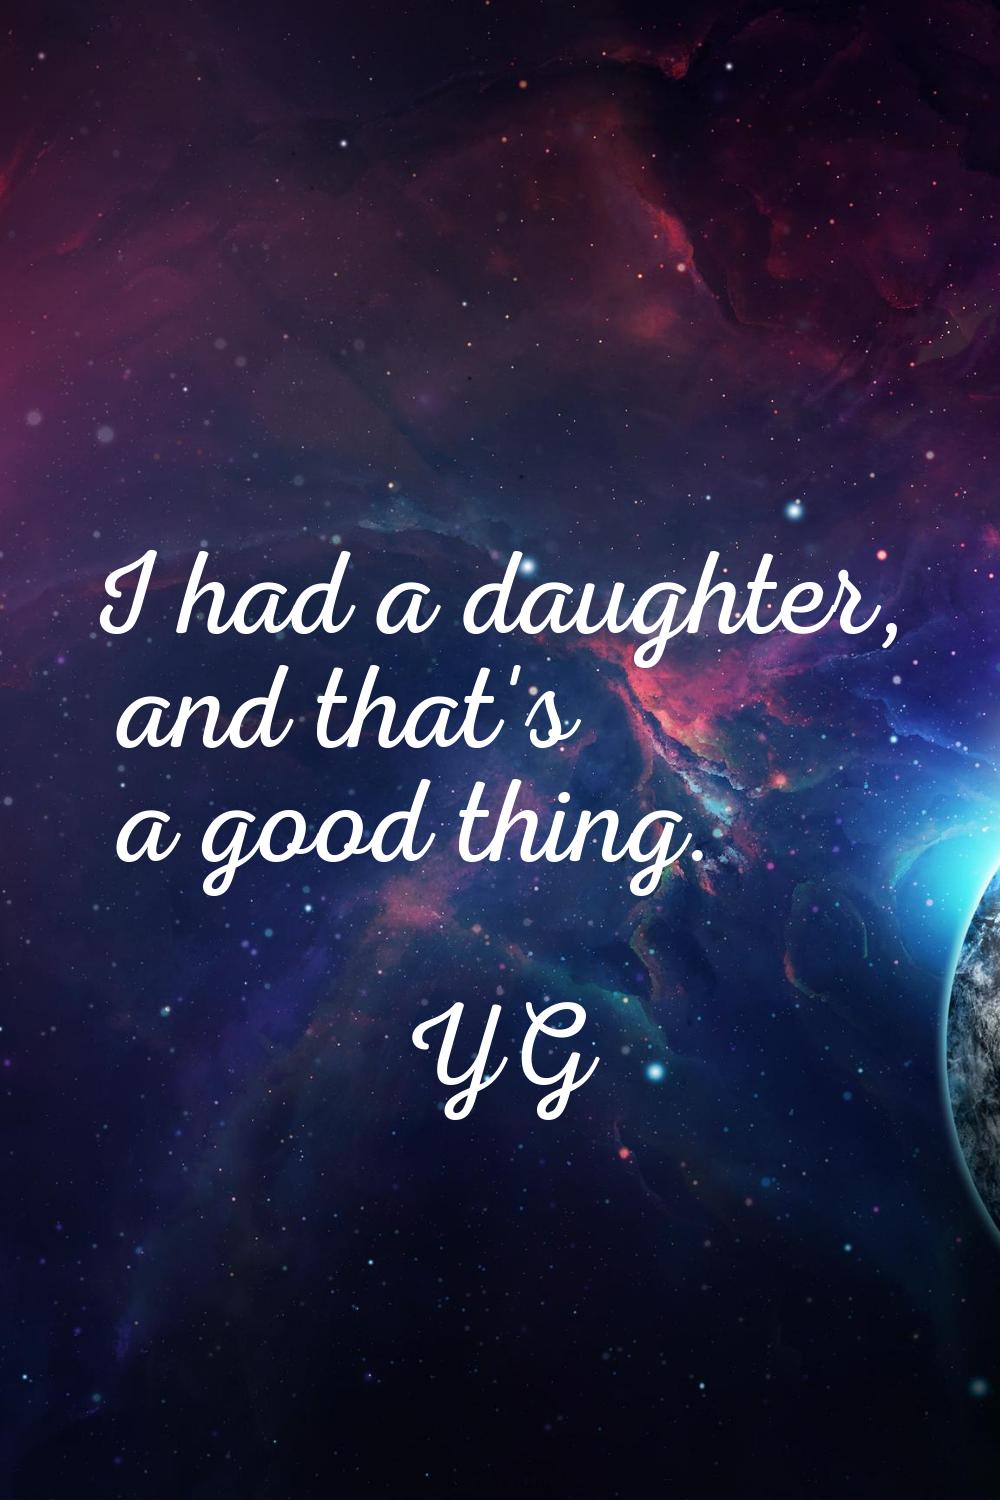 I had a daughter, and that's a good thing.